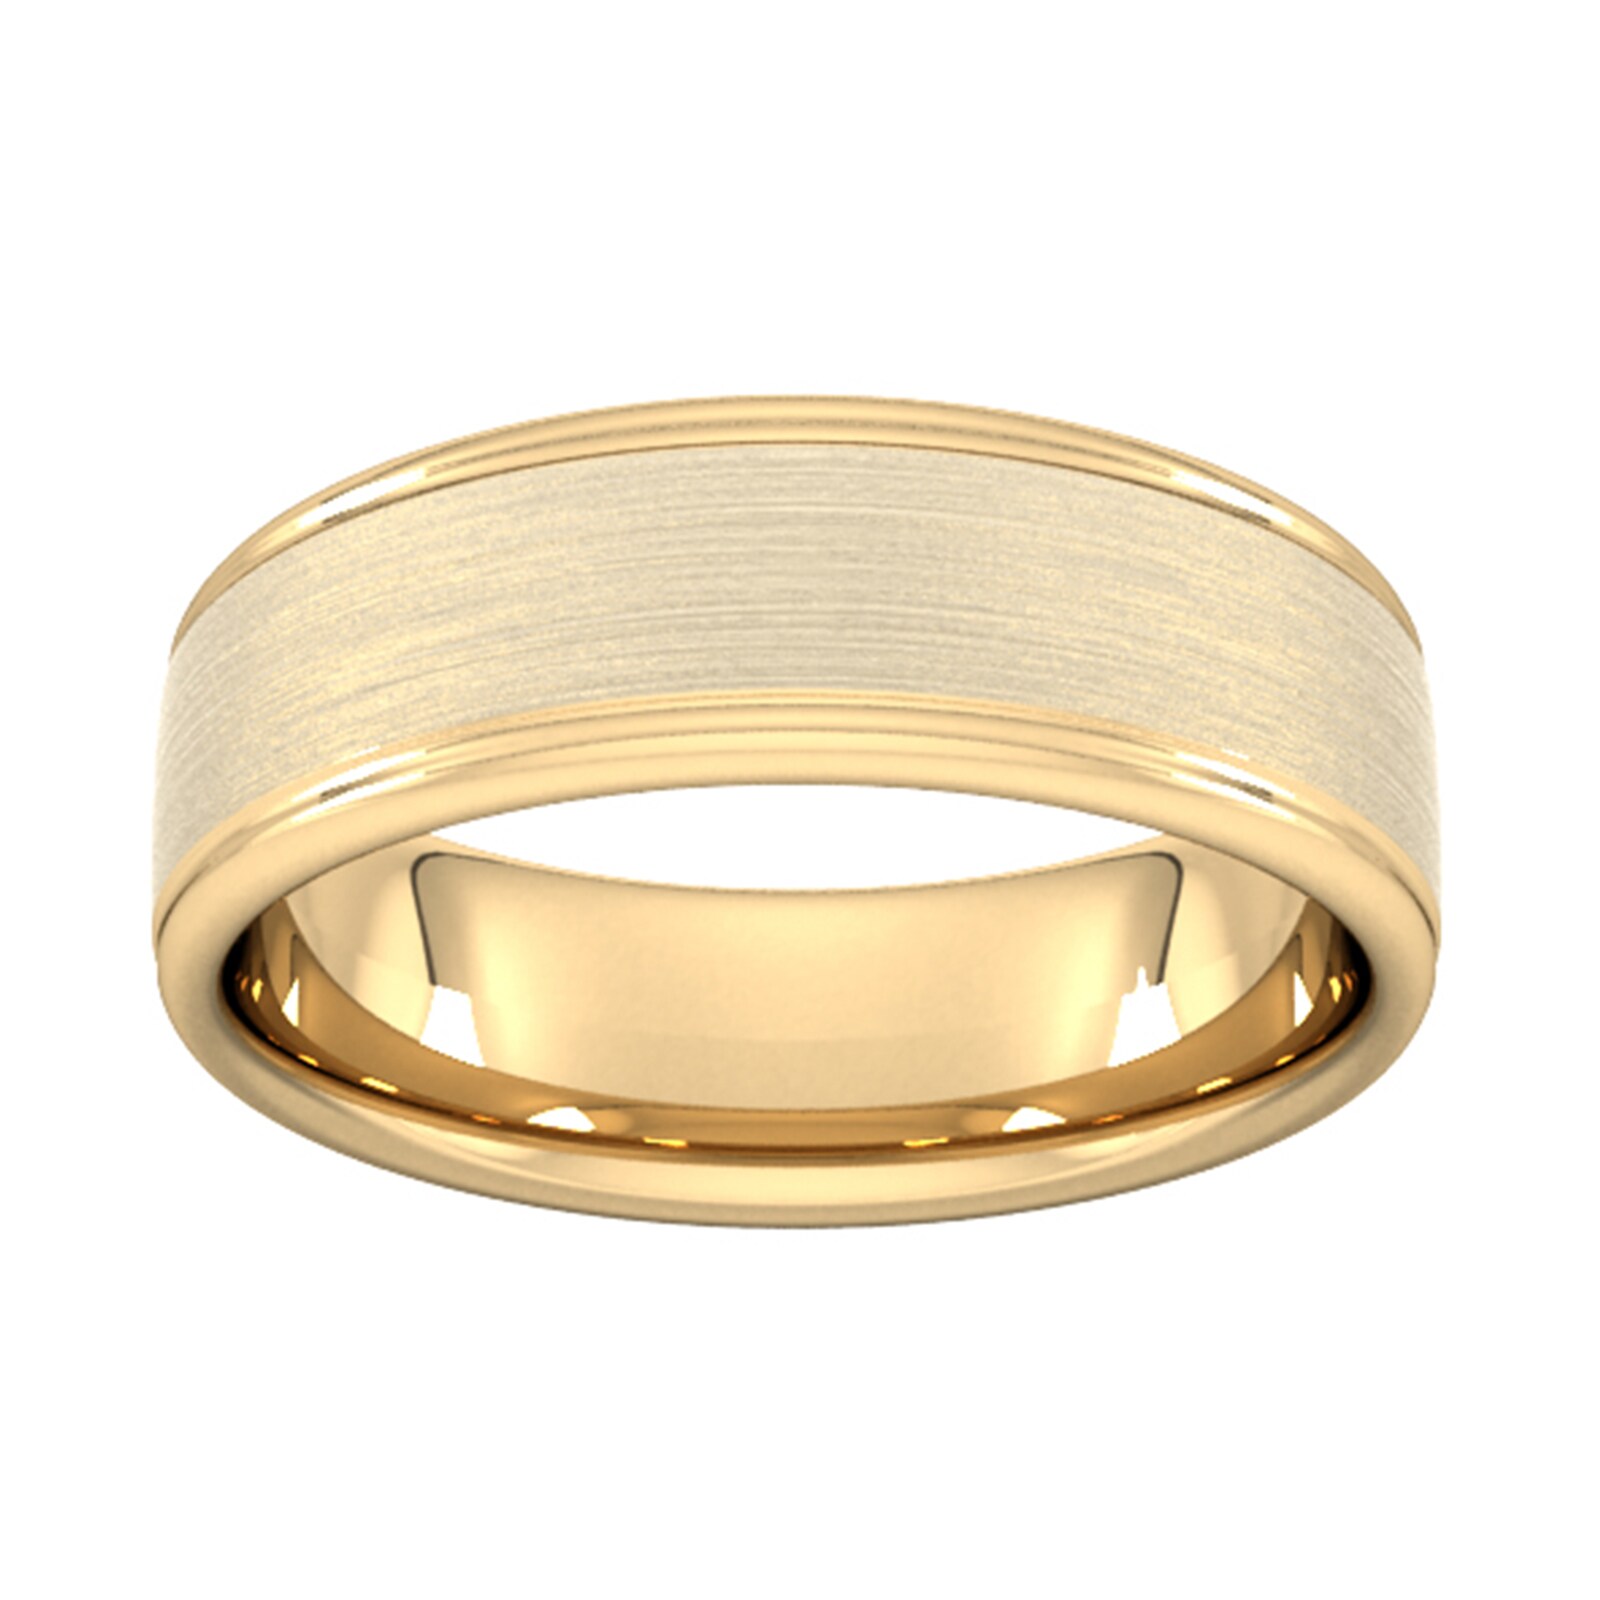 7mm Slight Court Standard Matt Centre With Grooves Wedding Ring In 18 Carat Yellow Gold - Ring Size Z